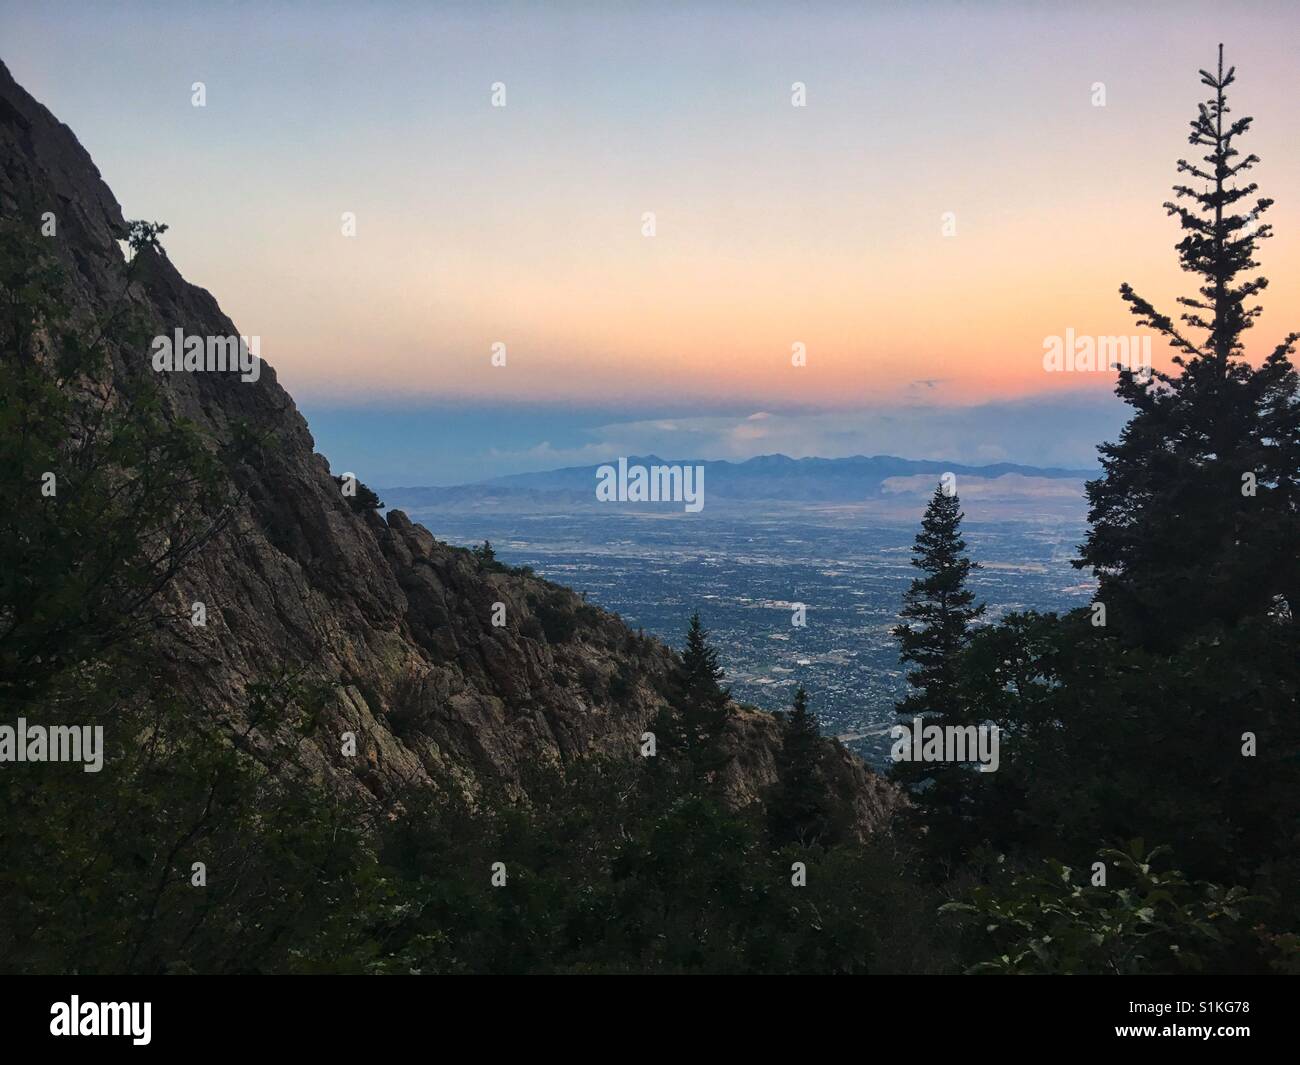 Salt lake valley as seen from the Mt. Olympus Wilderness. Stock Photo